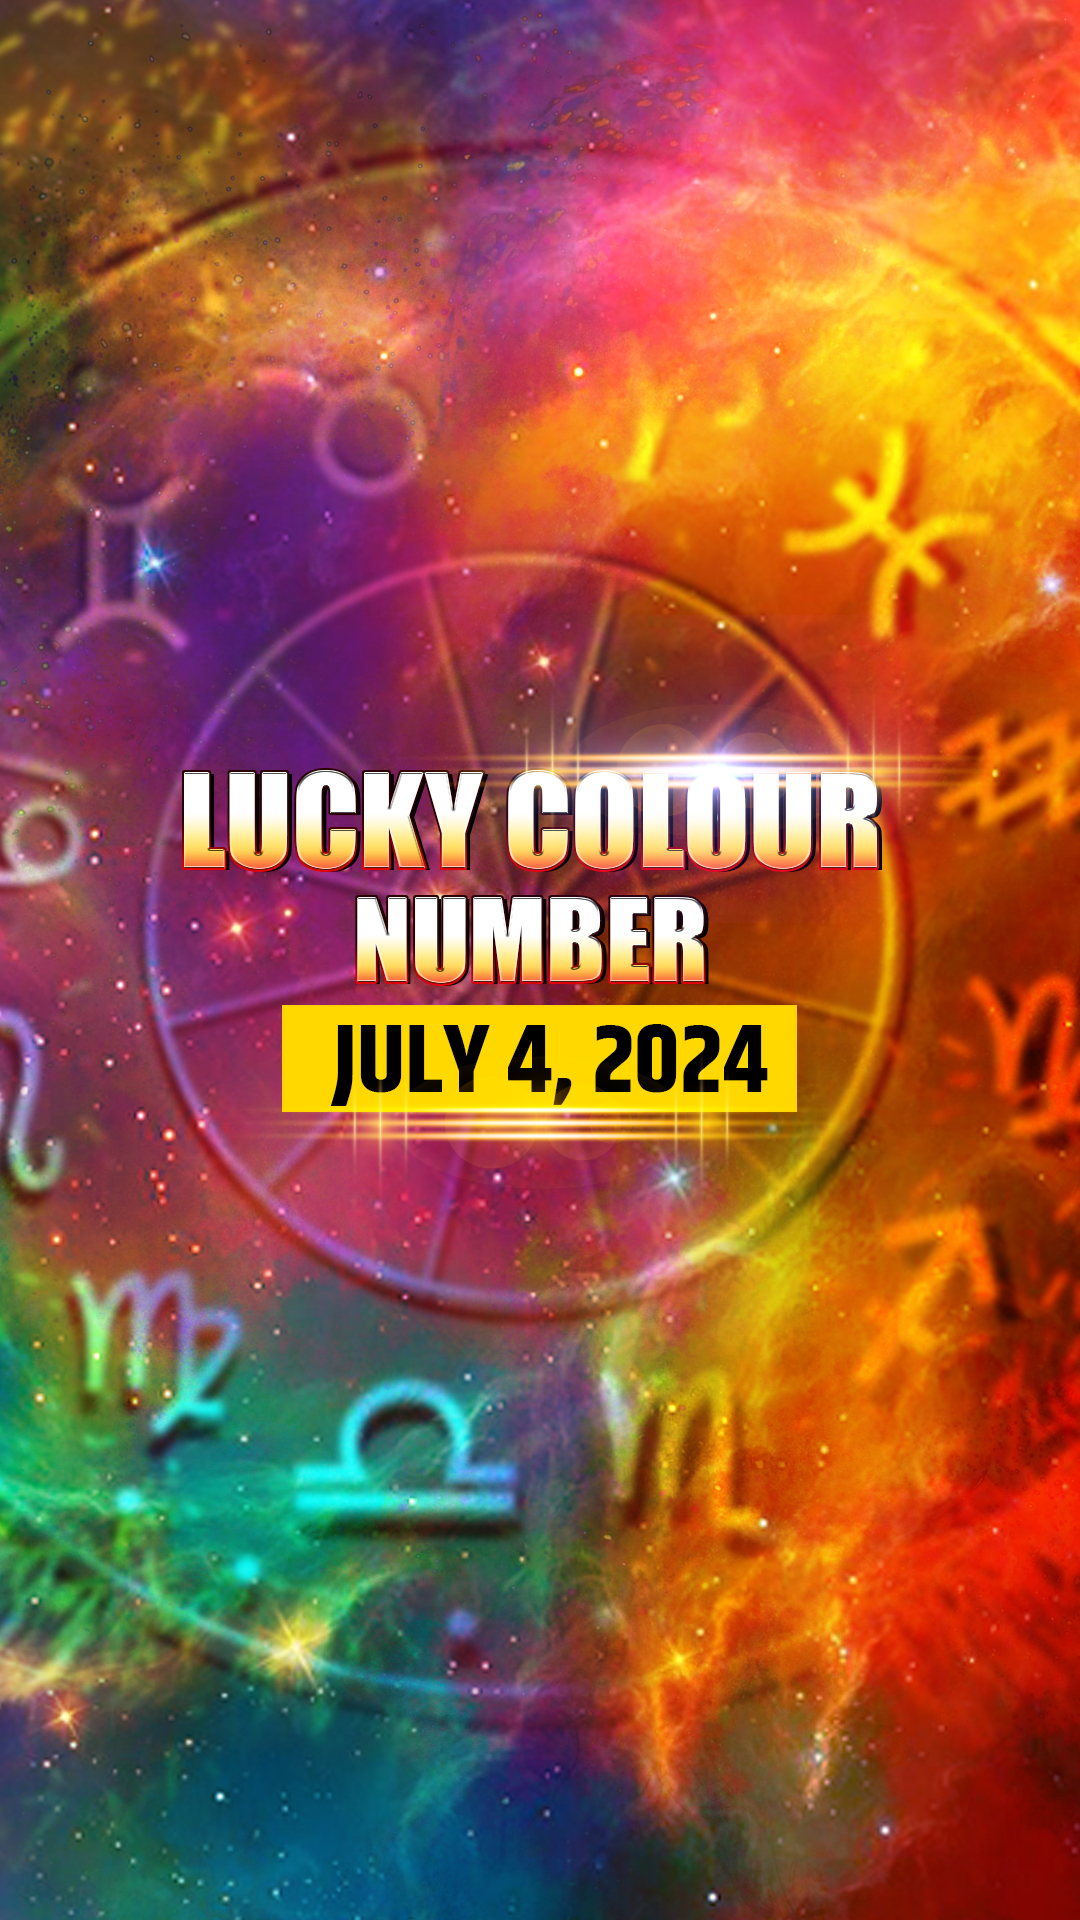 Know lucky colour, number of all zodiac signs in horoscope for July 4, 2024